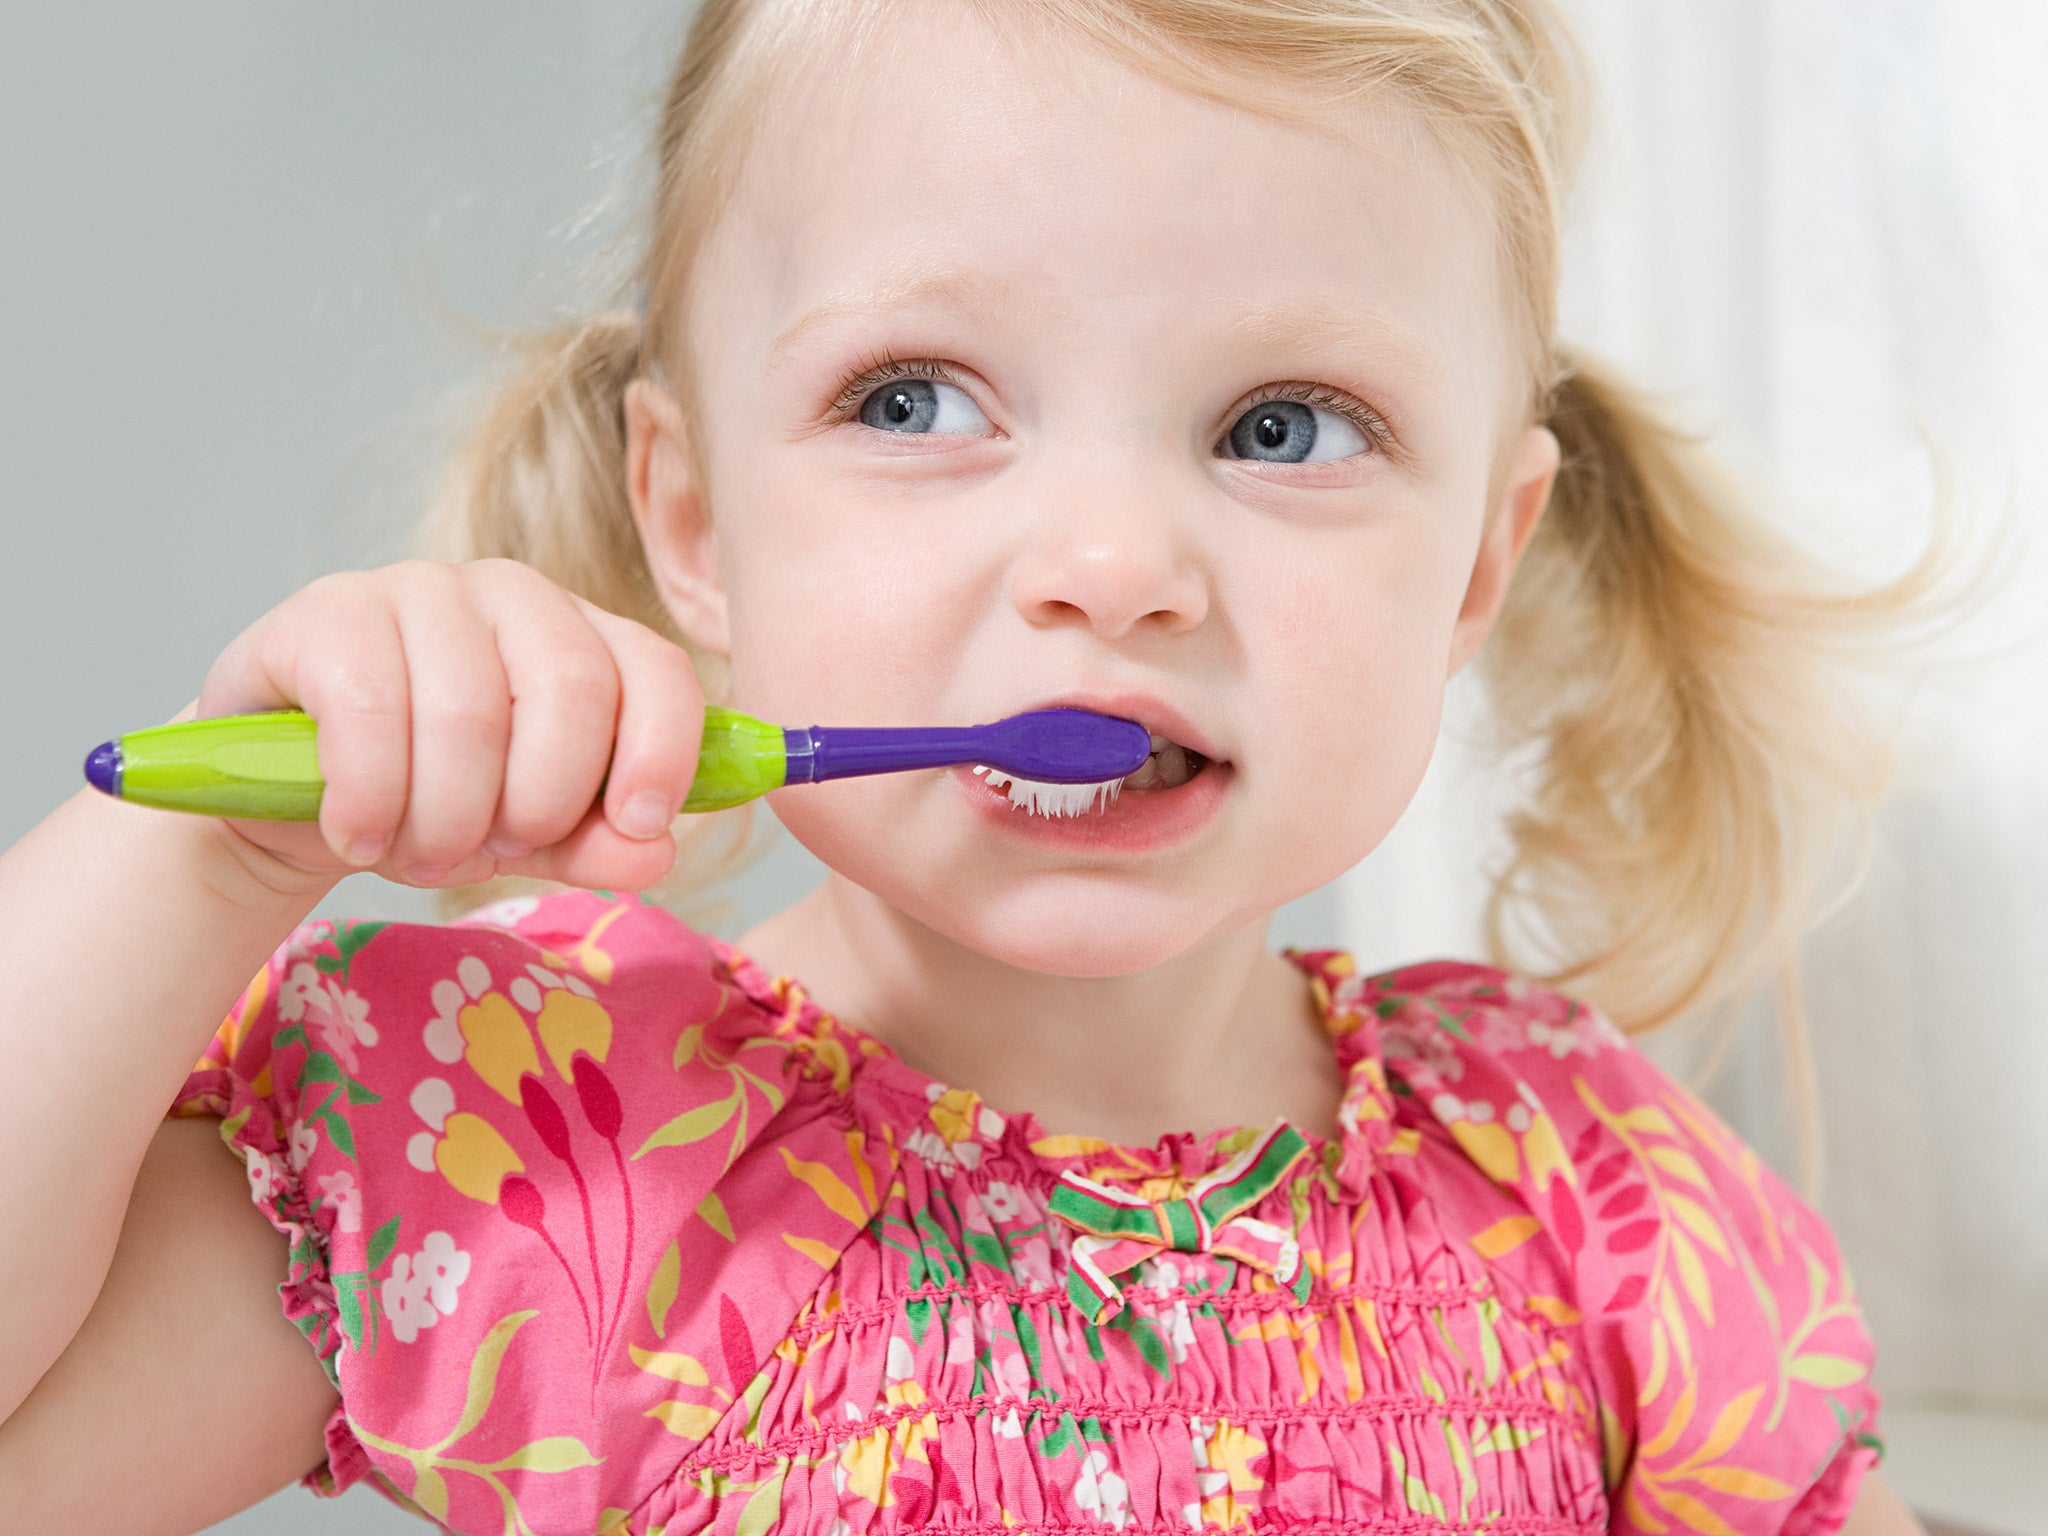 Teeth should be brushed twice a day to prevent tooth decay